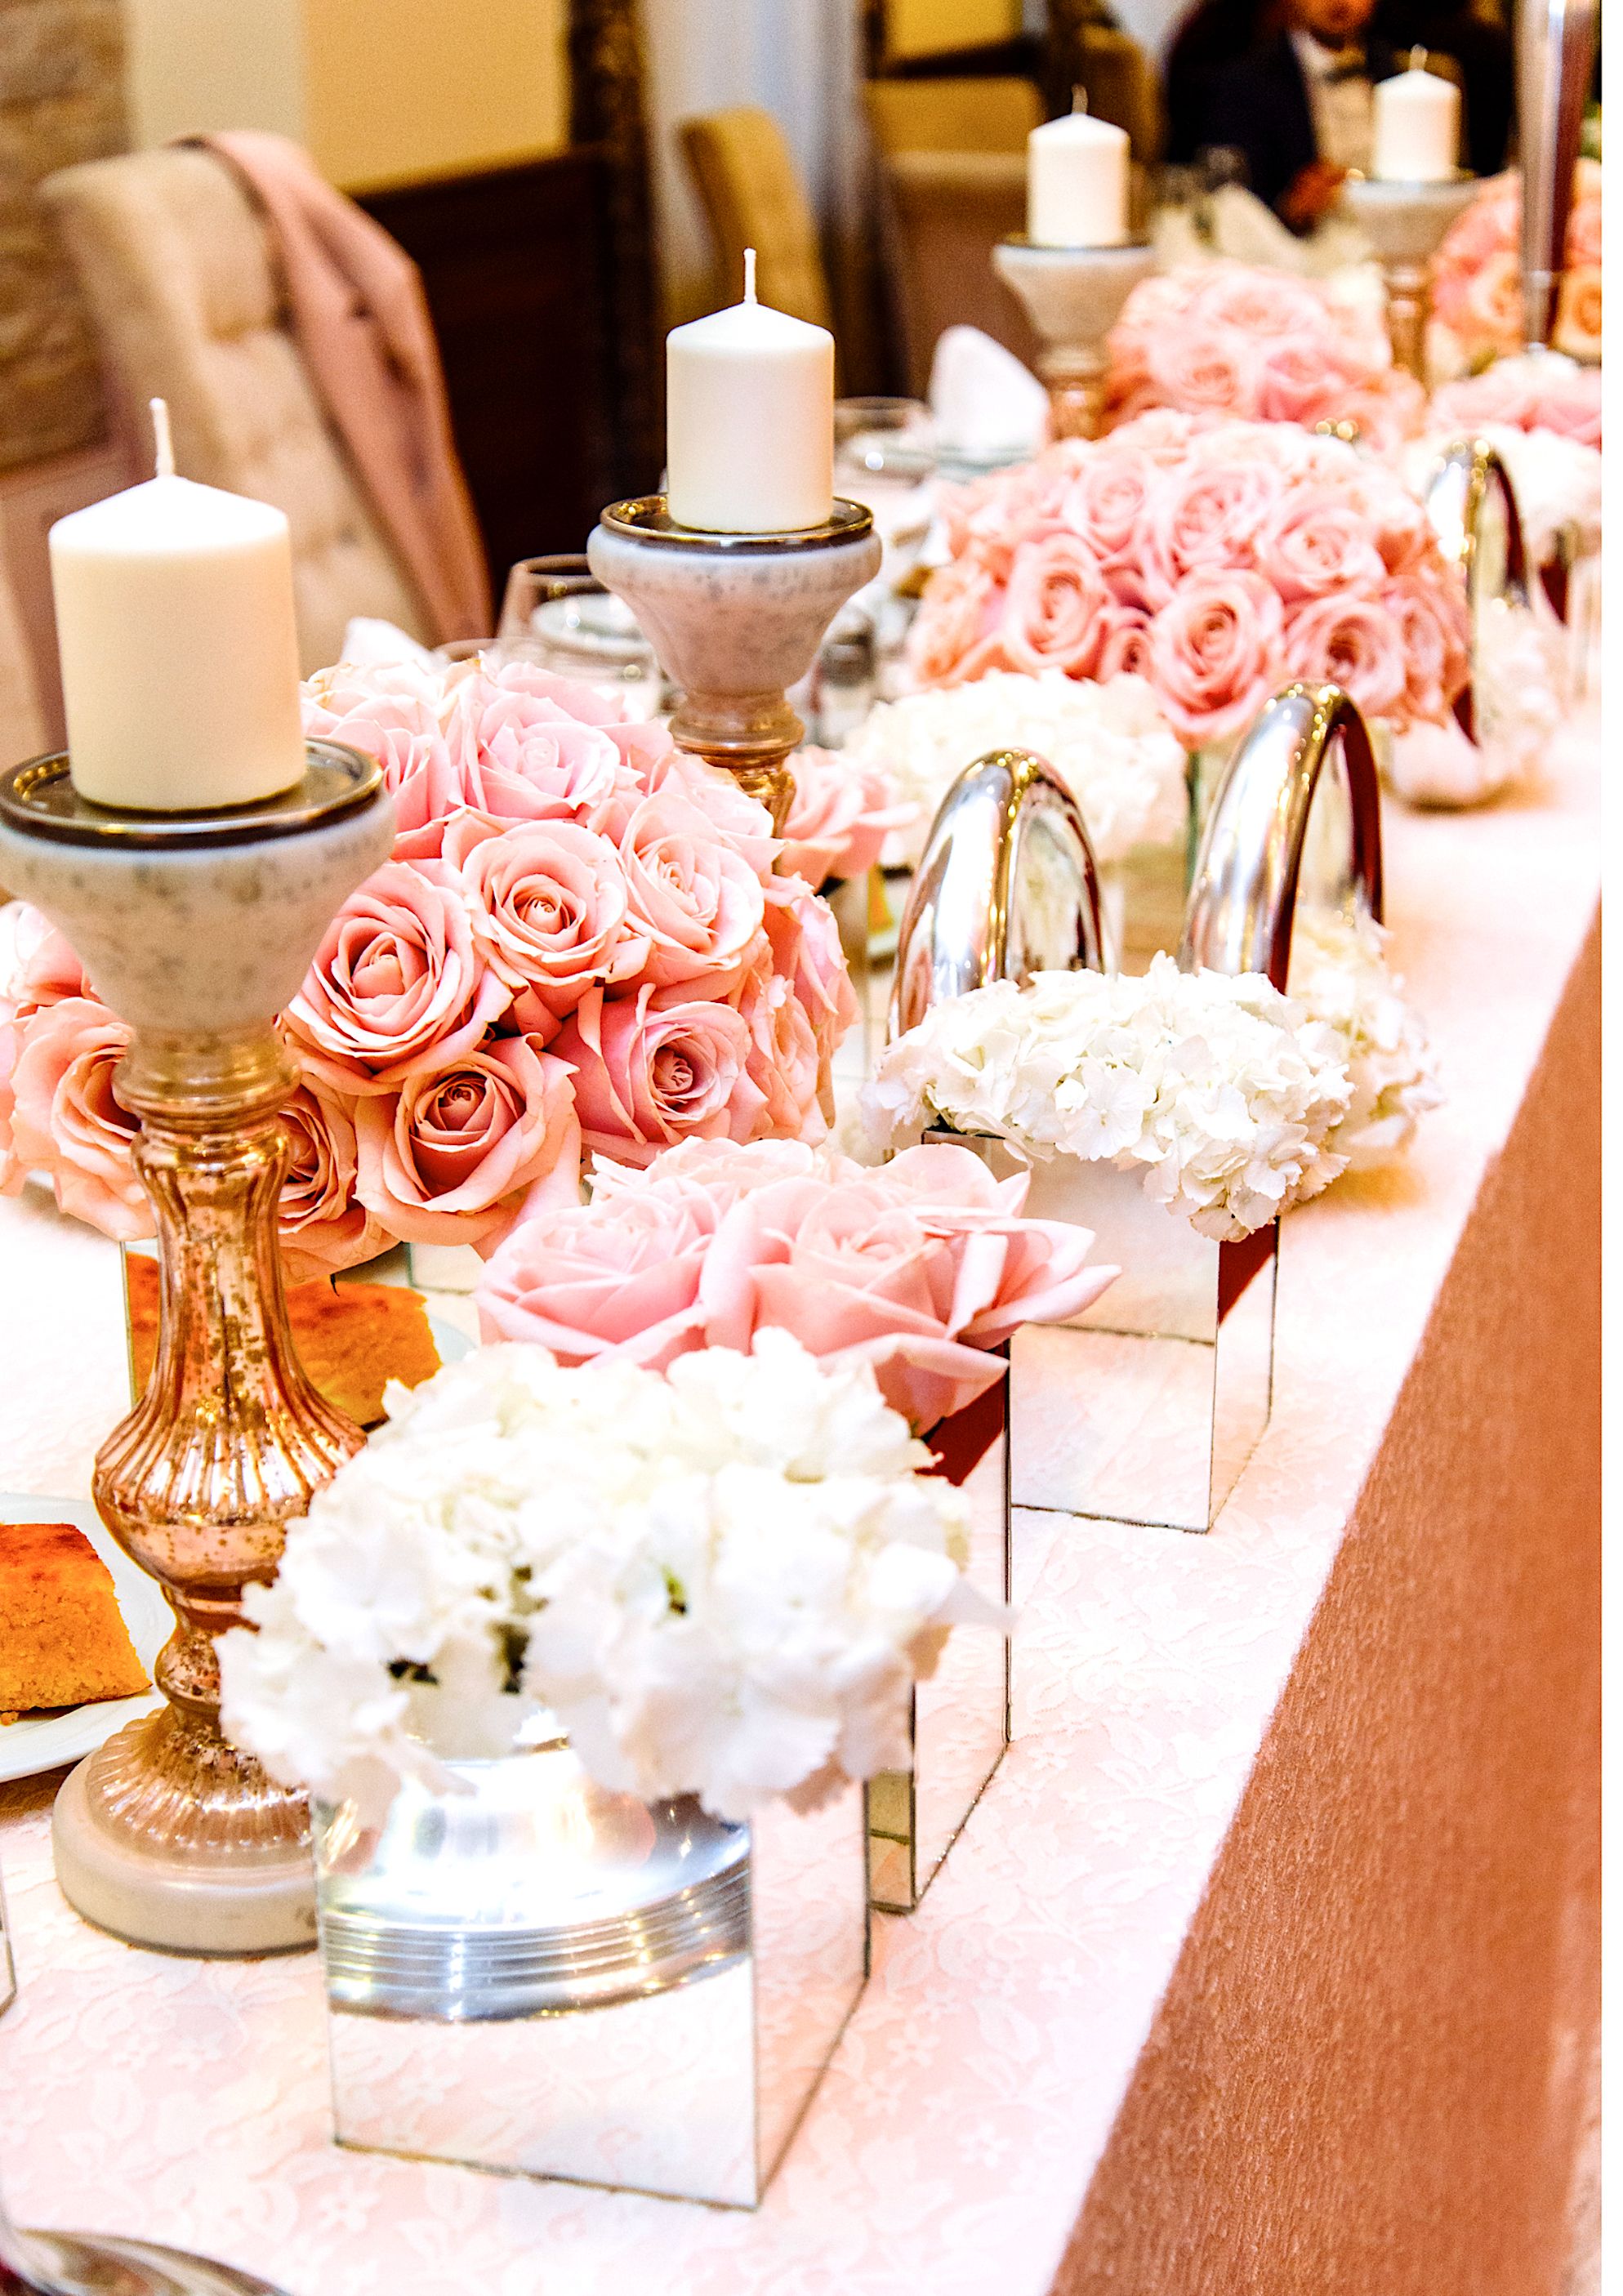 Low Pink & Ivory with Tall Candles